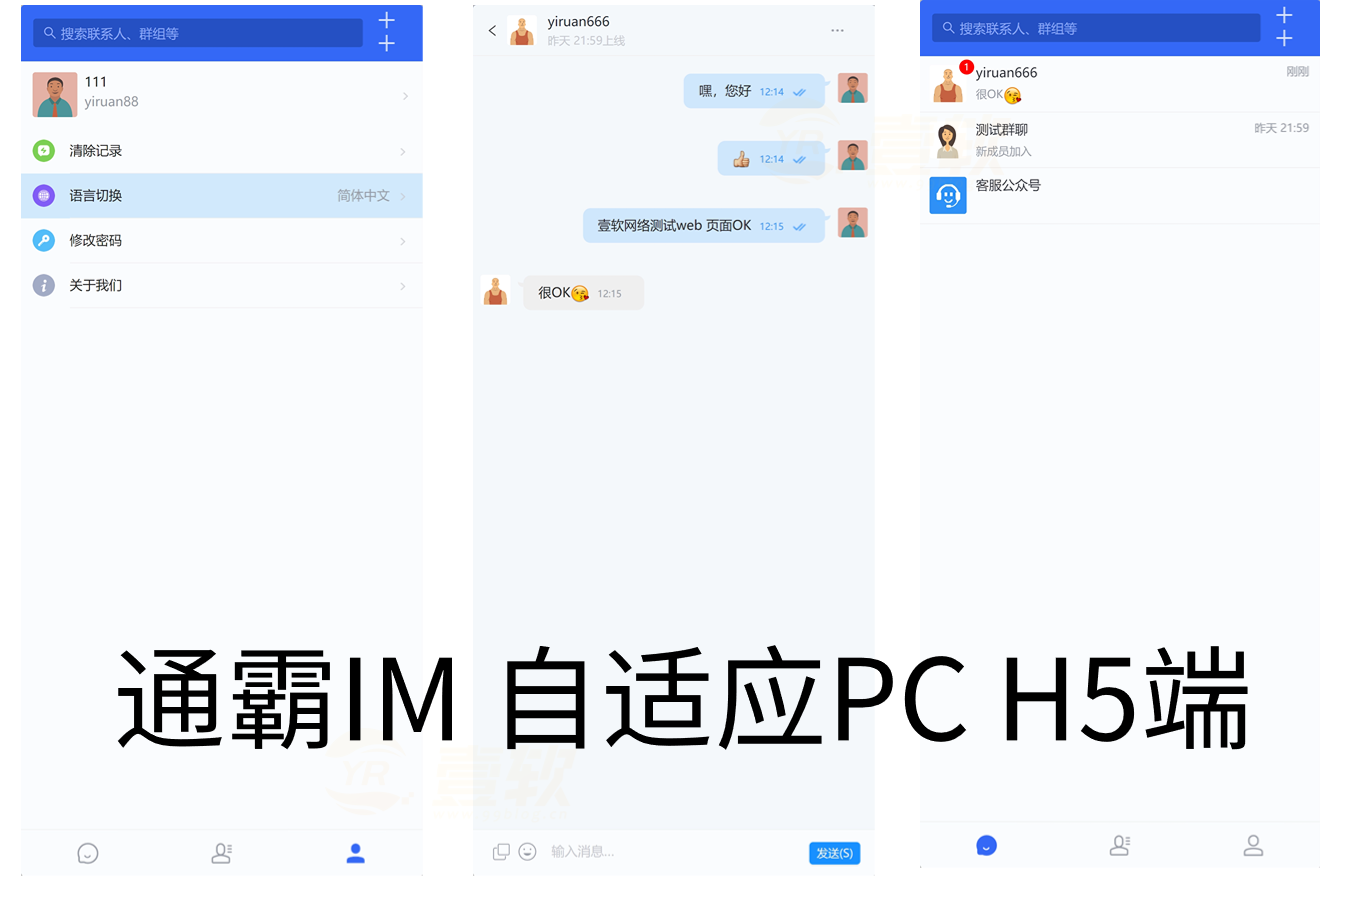 Picture [11]-Tongba IM repair version of the multi-language instant messaging APP - docking sound network - 10,000 people concurrently - Android IOSPCH5 - public - group chat transfer red envelope - Jinan OneSoft network technology